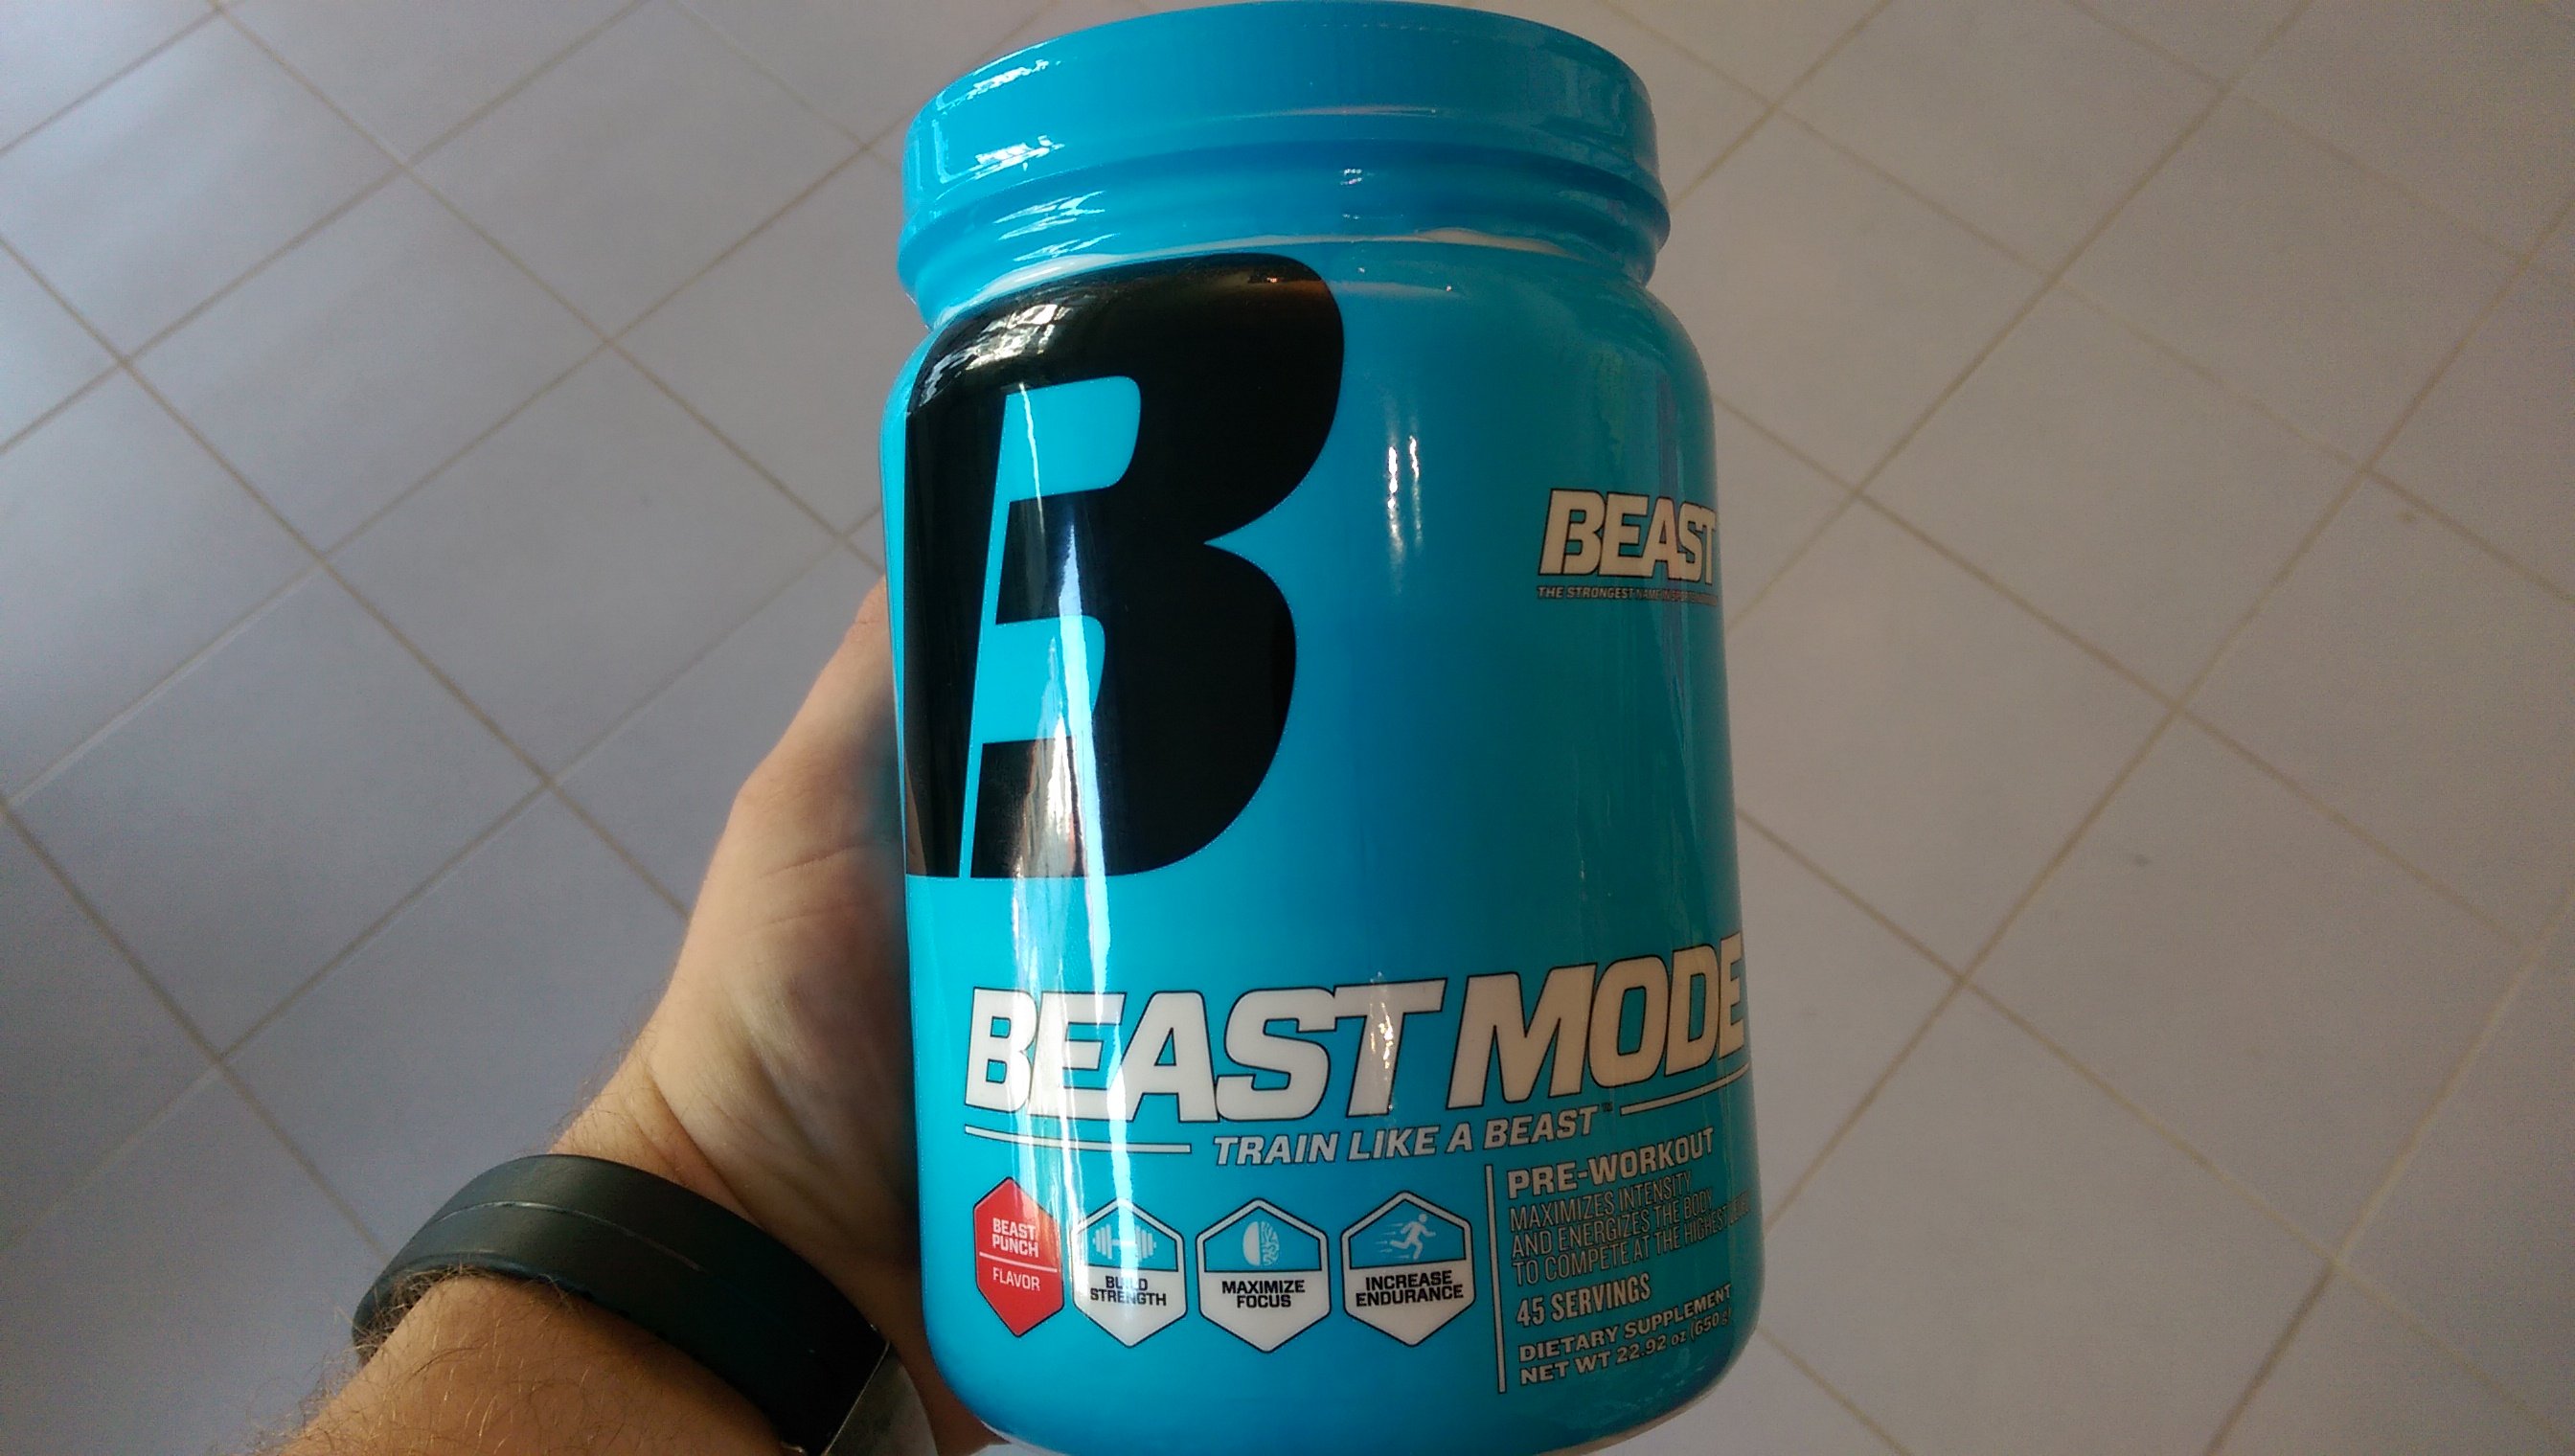  How to beast pre workout for Gym